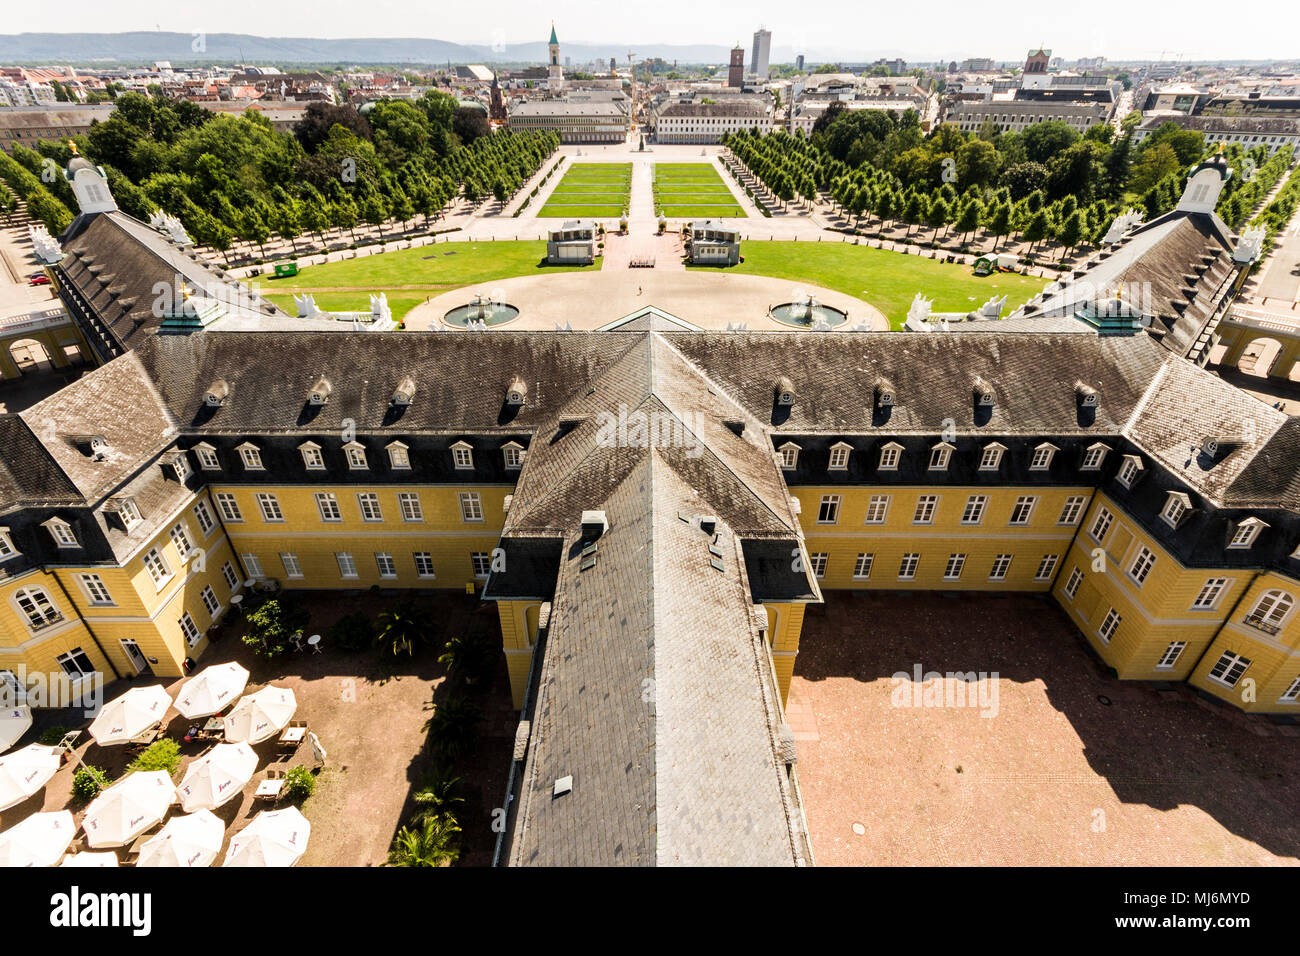 Views of the German city of Karlsruhe from the tower of Karlsruhe Palace (Karlsruher Schloss). Baden-Wurttemberg, Germany Stock Photo